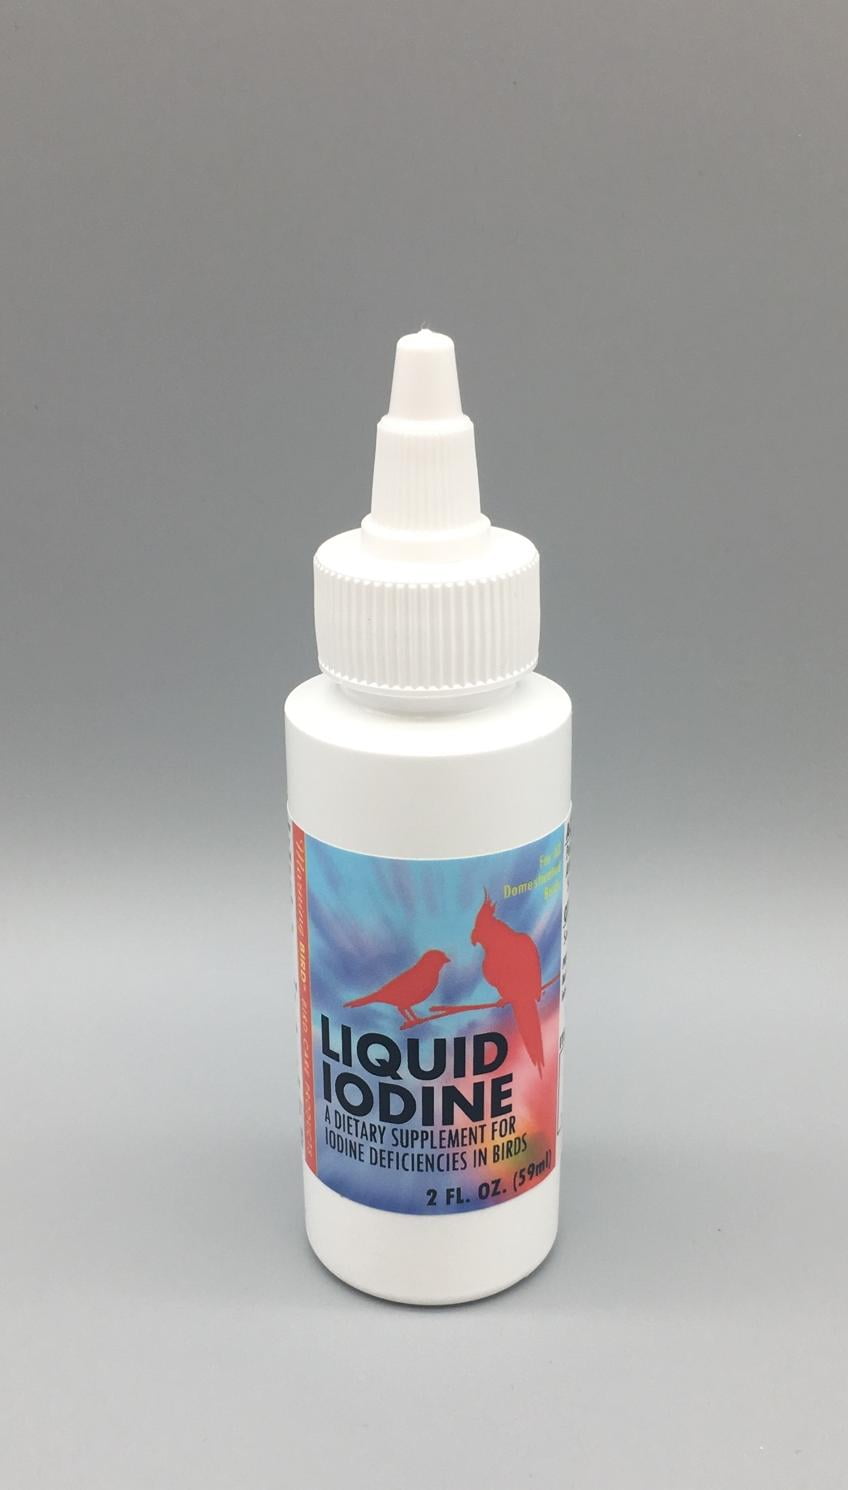 over the counter iodine supplements